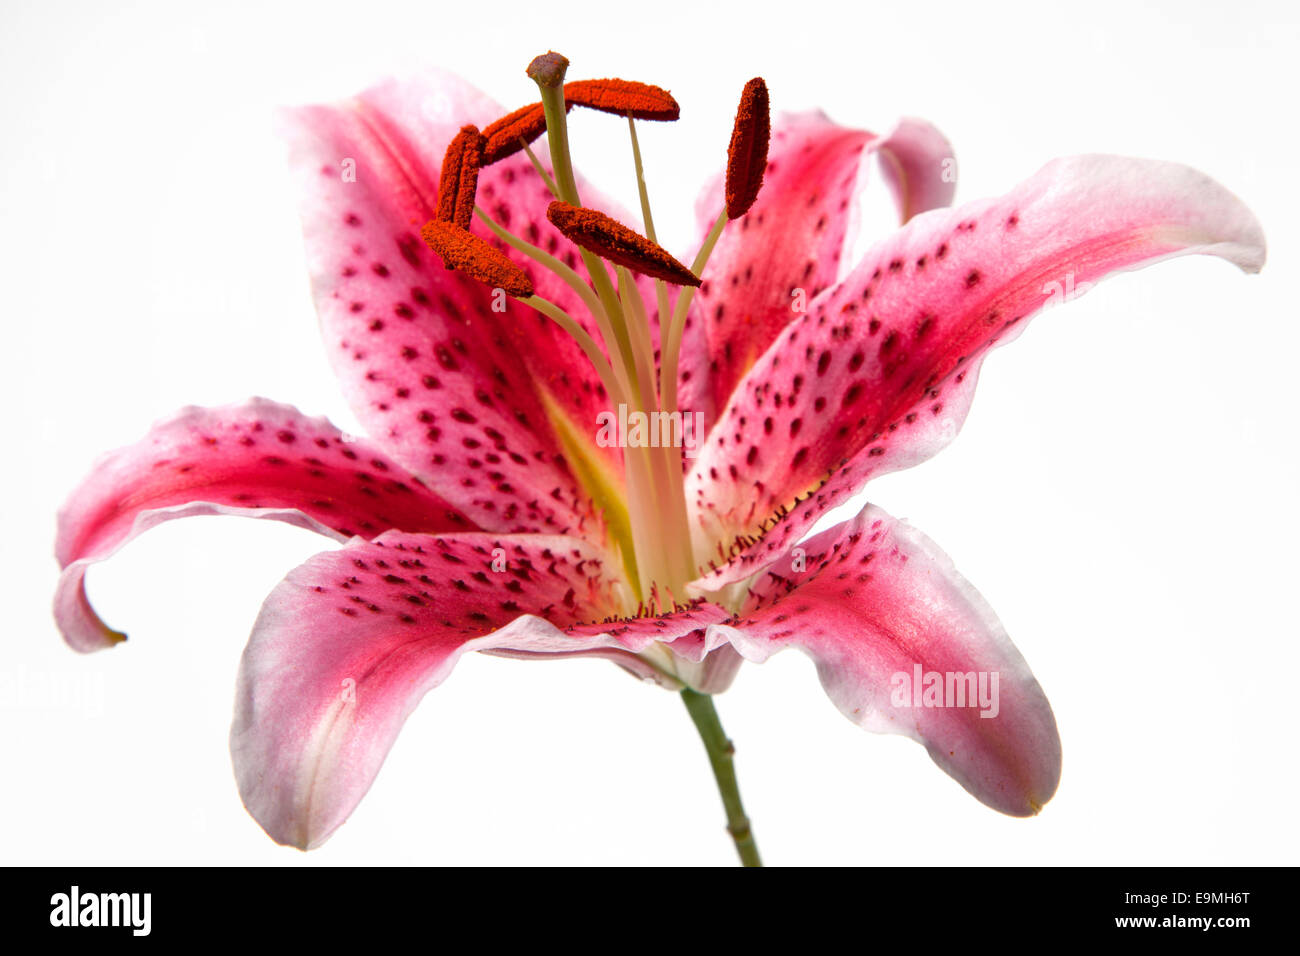 Lily flower Stock Photo